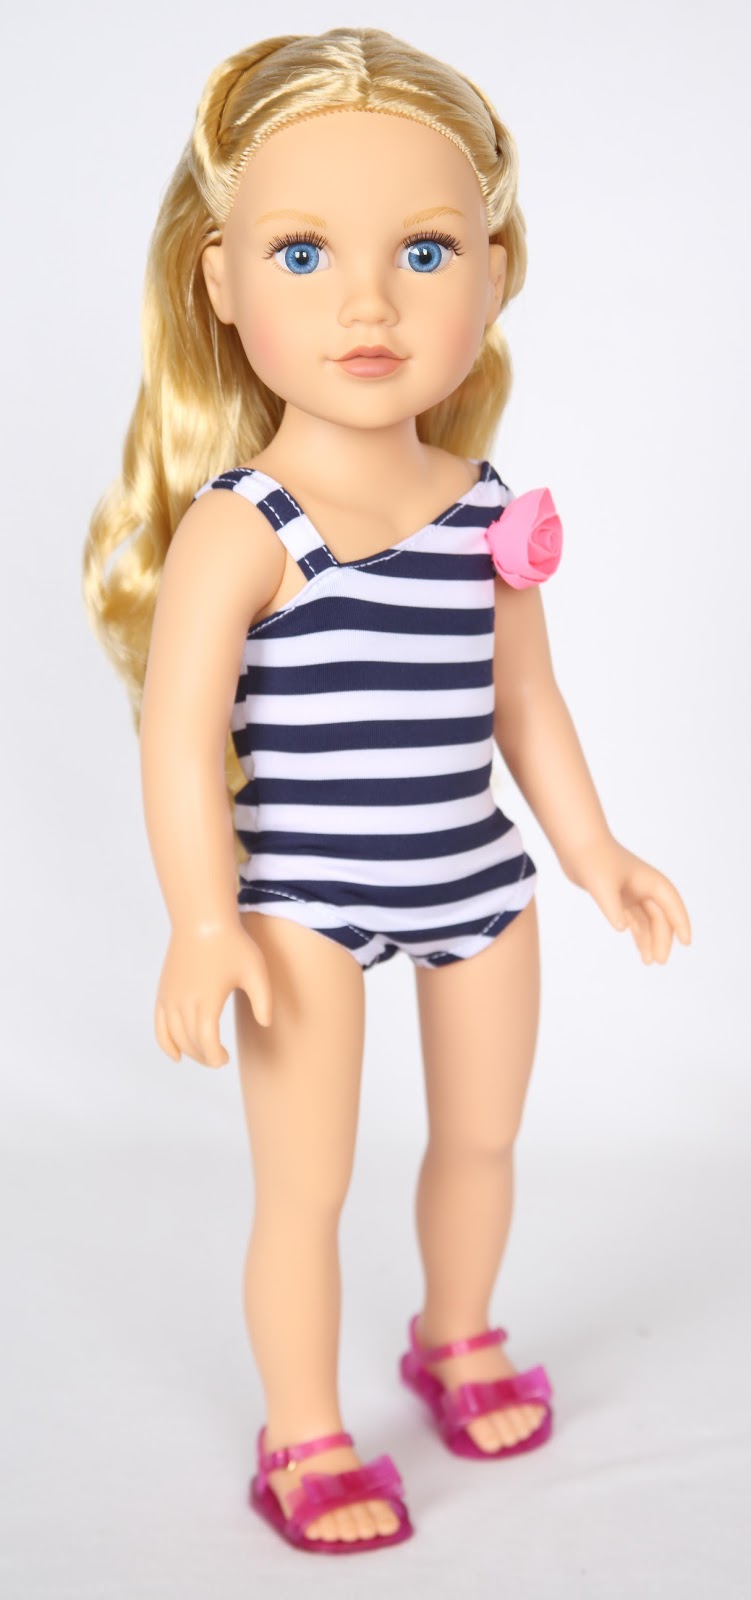  Girls Dolls Adventures: Journey Girl Meredith Trying on a Swimsuit